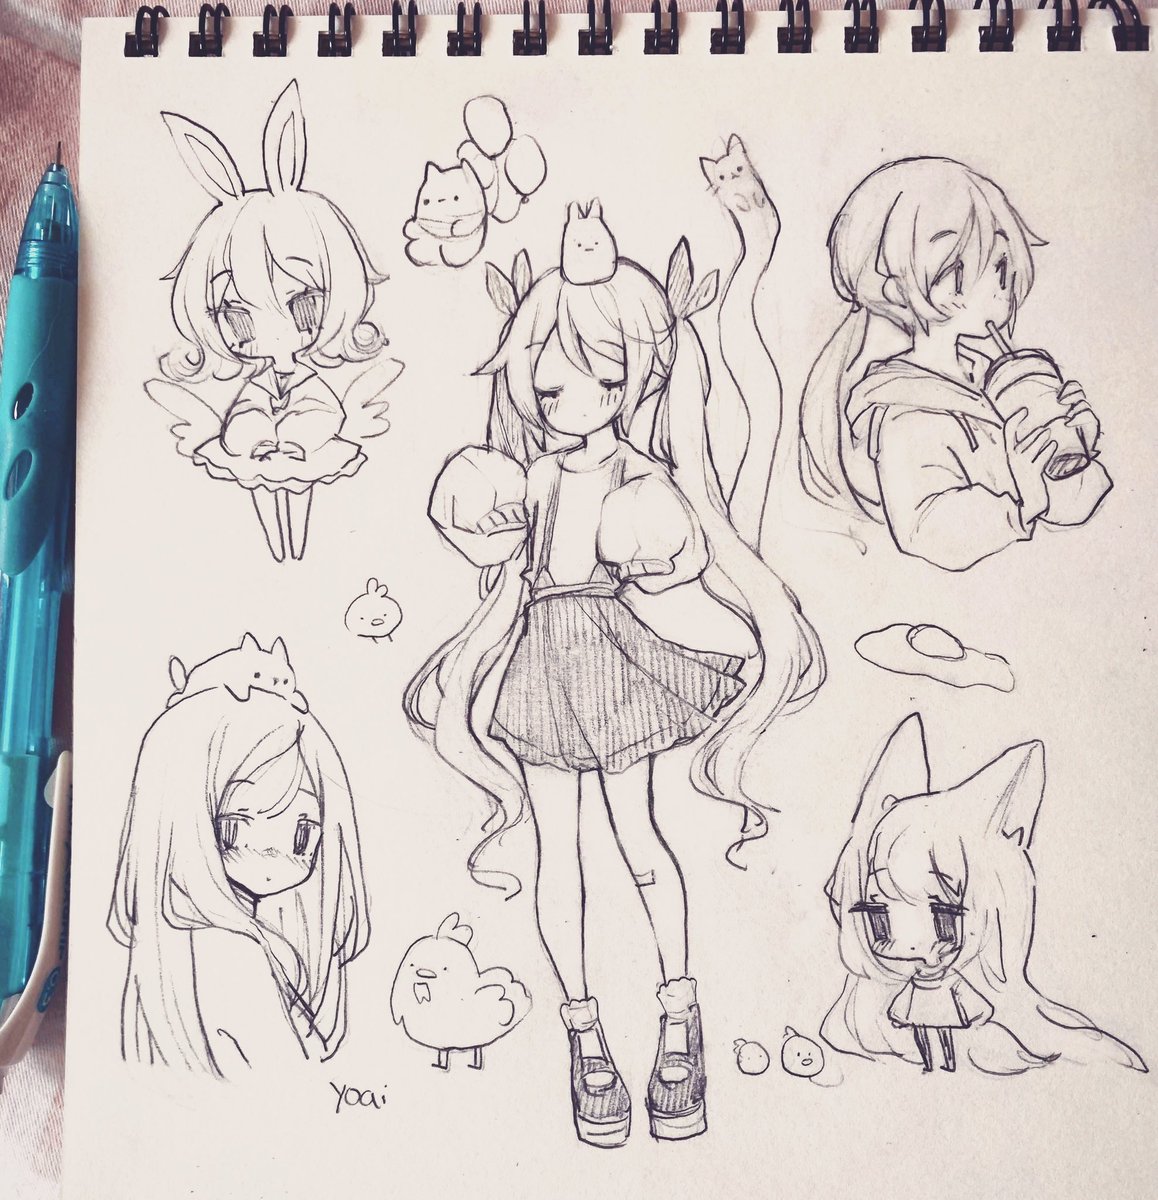 sketches page uwu

also it's been 5 years now since I joined twitter...thank you all for being here ? this amazing community not only helped me grow and improve my art skills, but also me as a person. 